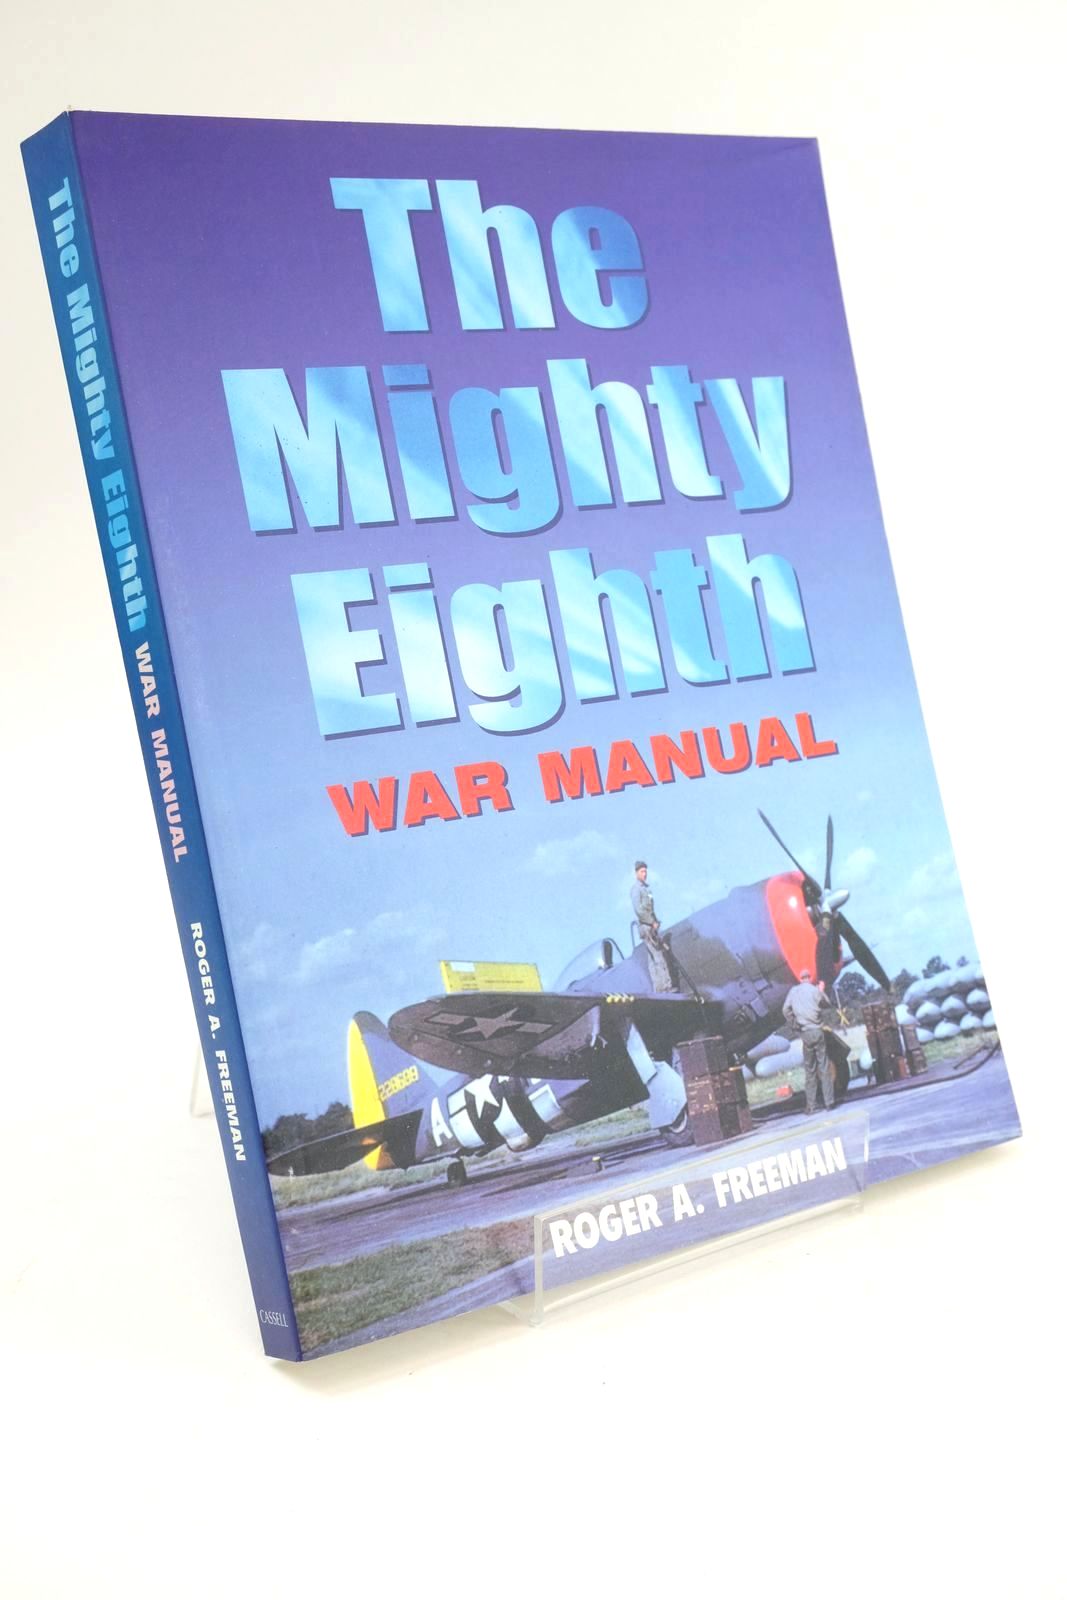 Photo of THE MIGHTY EIGHTH WAR MANUAL written by Freeman, Roger A. illustrated by Ottaway, Norman published by Cassell (STOCK CODE: 1325150)  for sale by Stella & Rose's Books